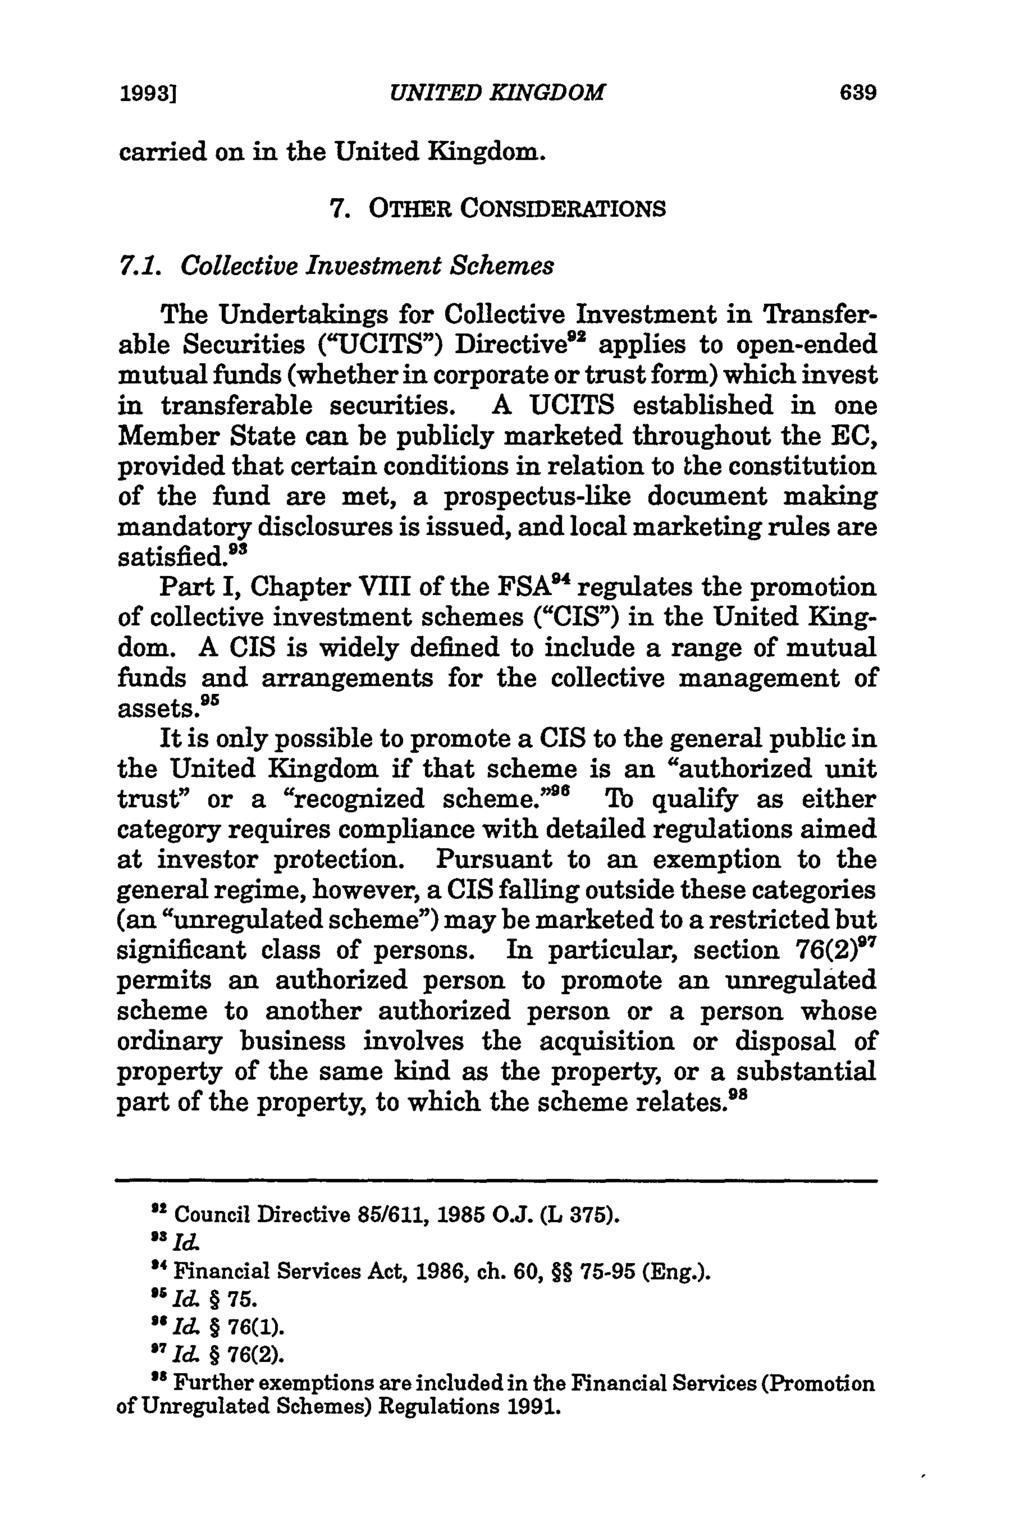 1993] carried on in the United Kingdom. 7. OTHER CONSmERATIONS 7.1. Collective Investment Schemes The Undertakings for Collective Investment in Transferable Securities ("UCITS") Directive" 2 applies